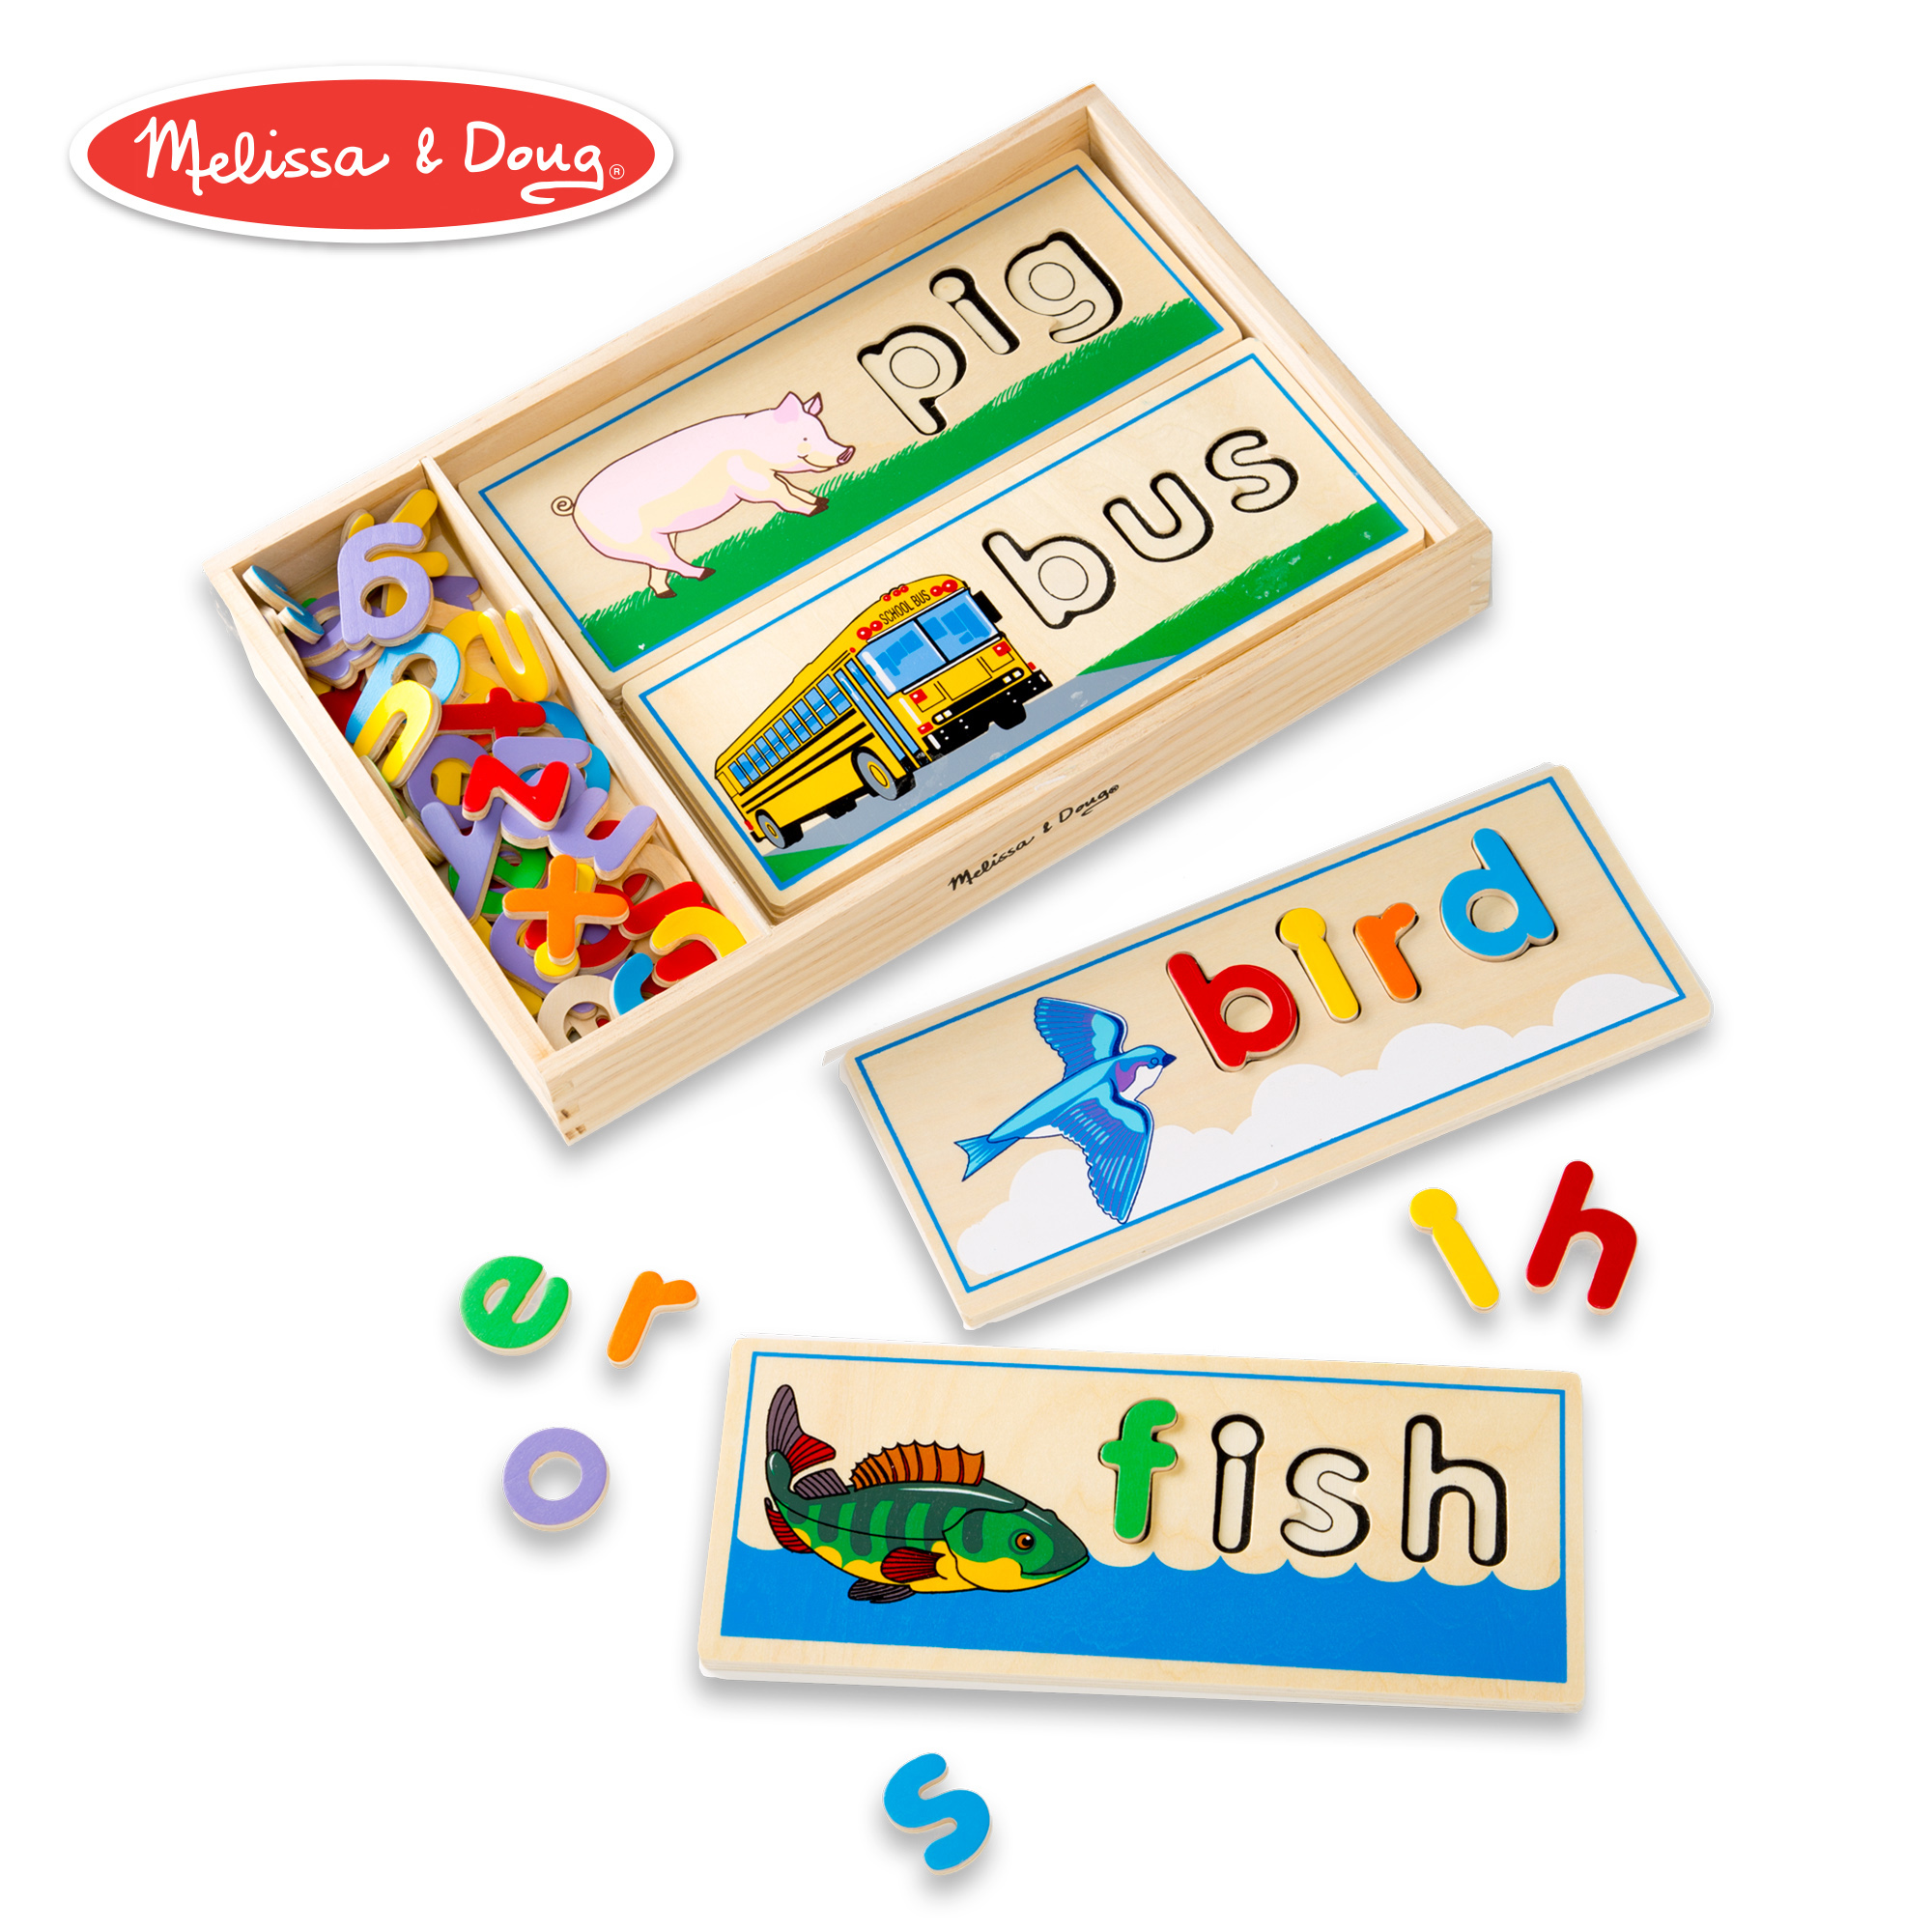 See & Spell Learning Toy, Developmental Toys, Wooden Case, Develops Vocabulary And Spelling Skills, 50+ Wooden Pieces